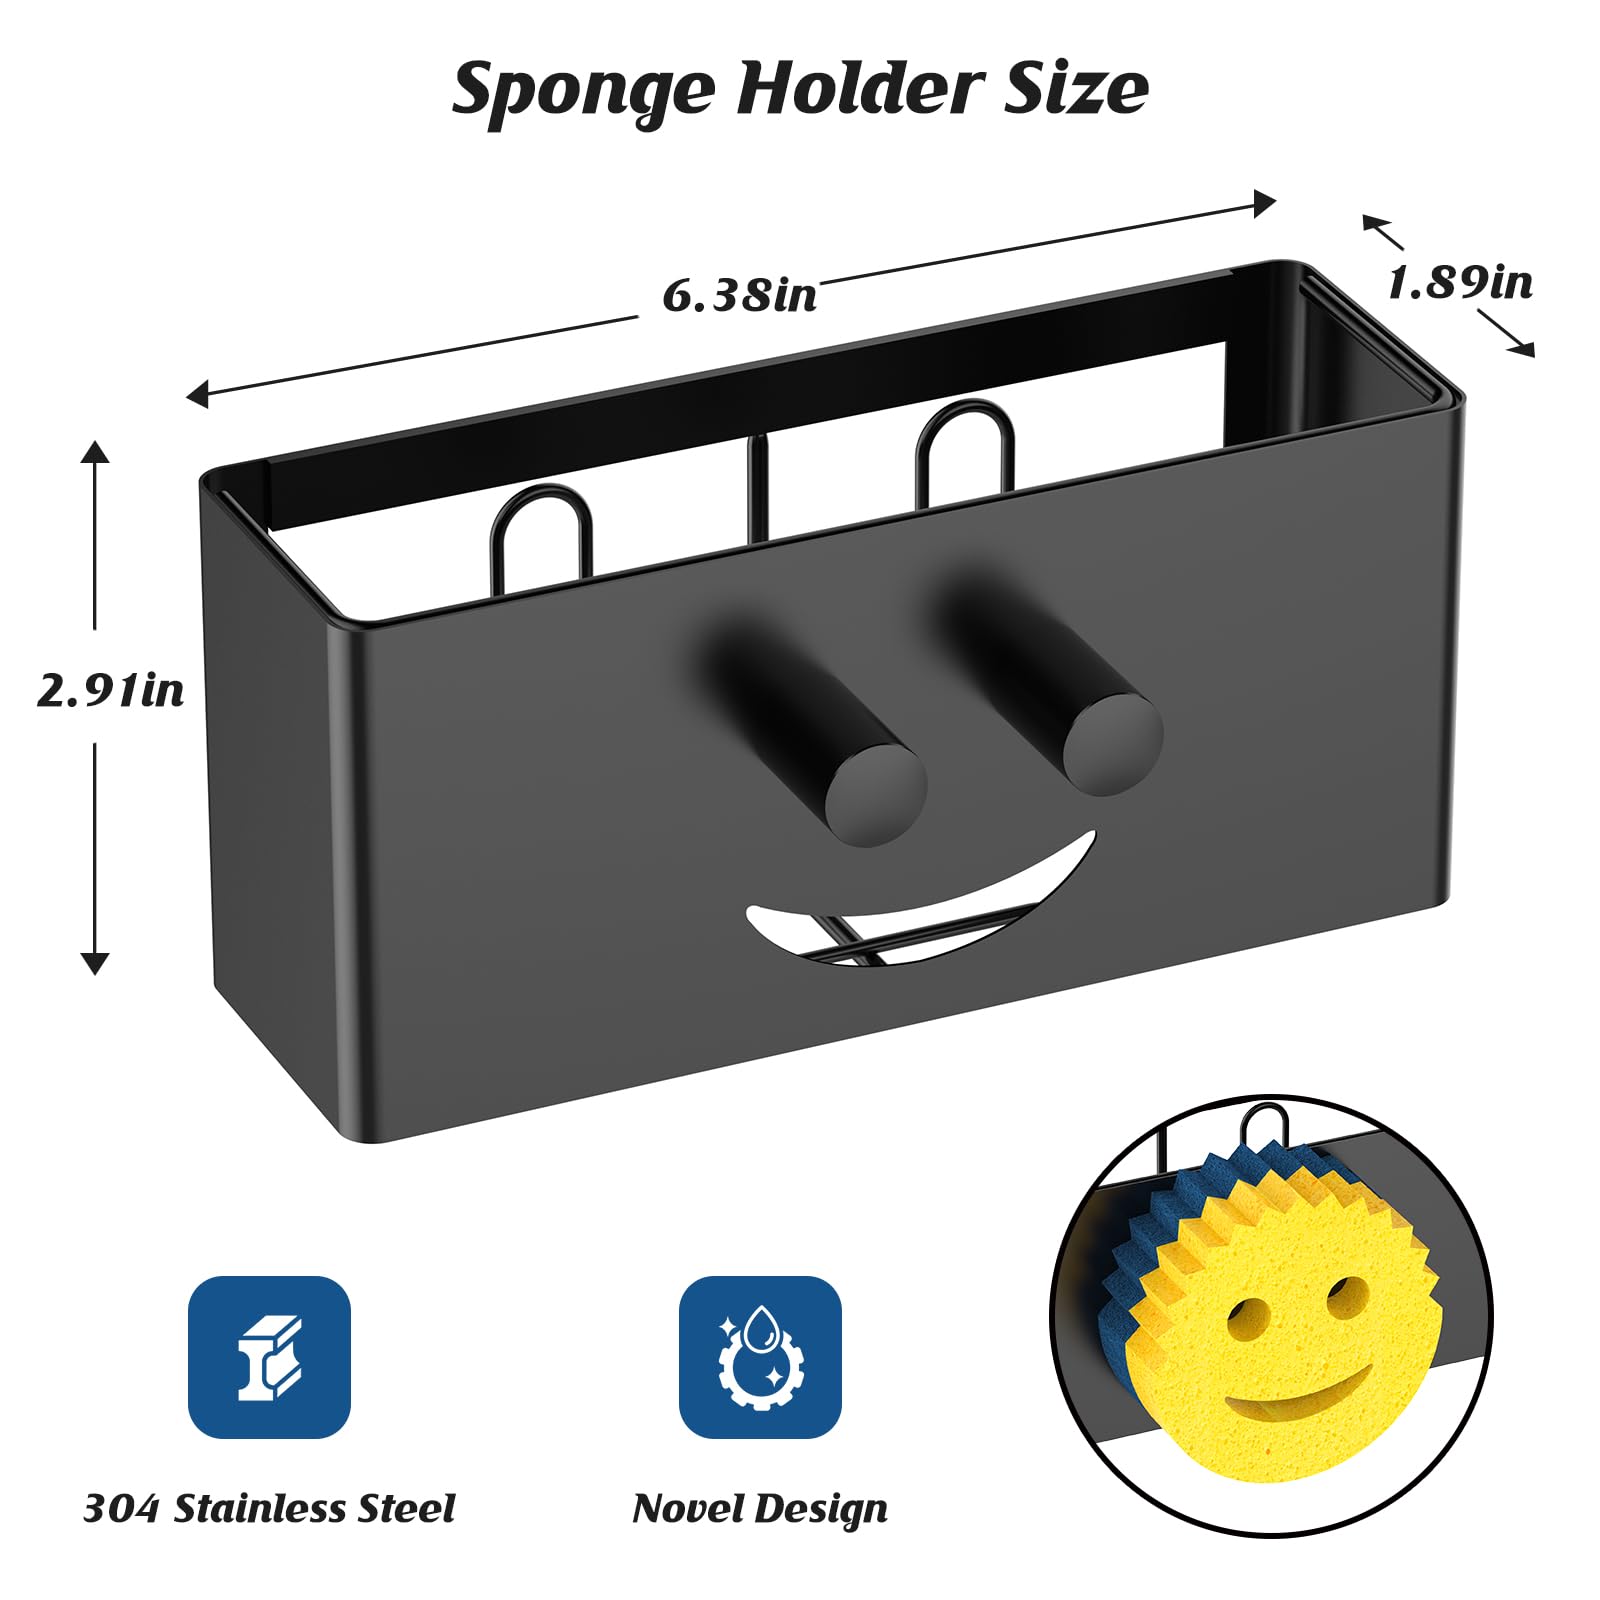 Utobao Sponge Holder, Smiley Face Kitchen Sink Caddy for Kitchen Sink, Sink Brush Holder for Holding Smiling Face Scrubber, Soap, Dish Brush,2 Installation Ways (Suction Cups & Adhesive Hook)-Black